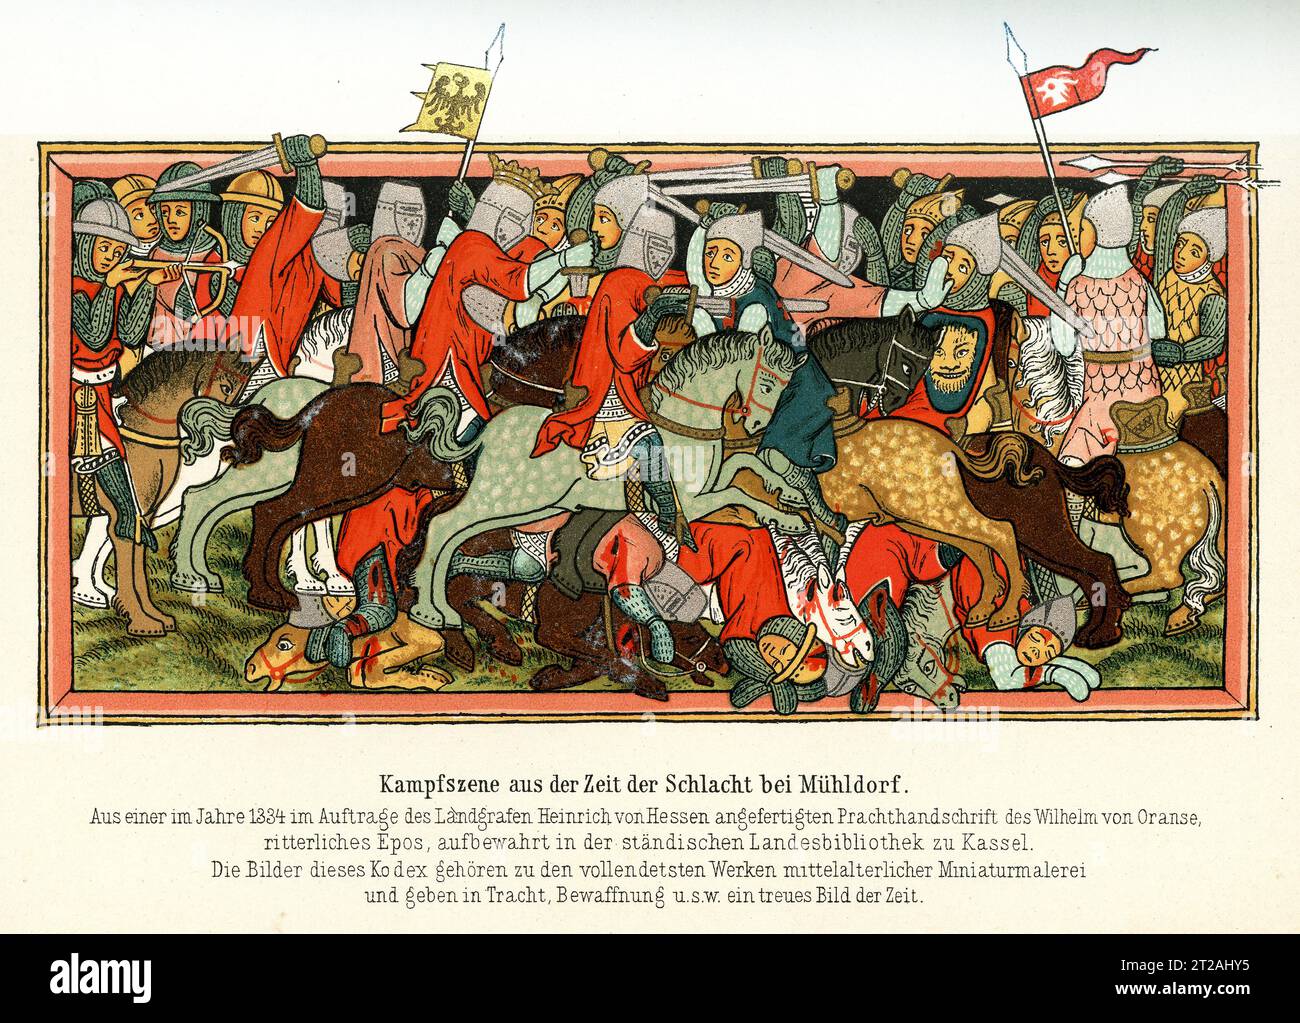 Miniature of the Battle of Mühldorf (year 1322) between the Bavarian dinasty Wittelsbach and the Austrian Habsburg for the rule over the Holy Roman Empire ending with the victory of German king Louis of Wittelsbach, Kassel Landesbibliothek Stock Photo